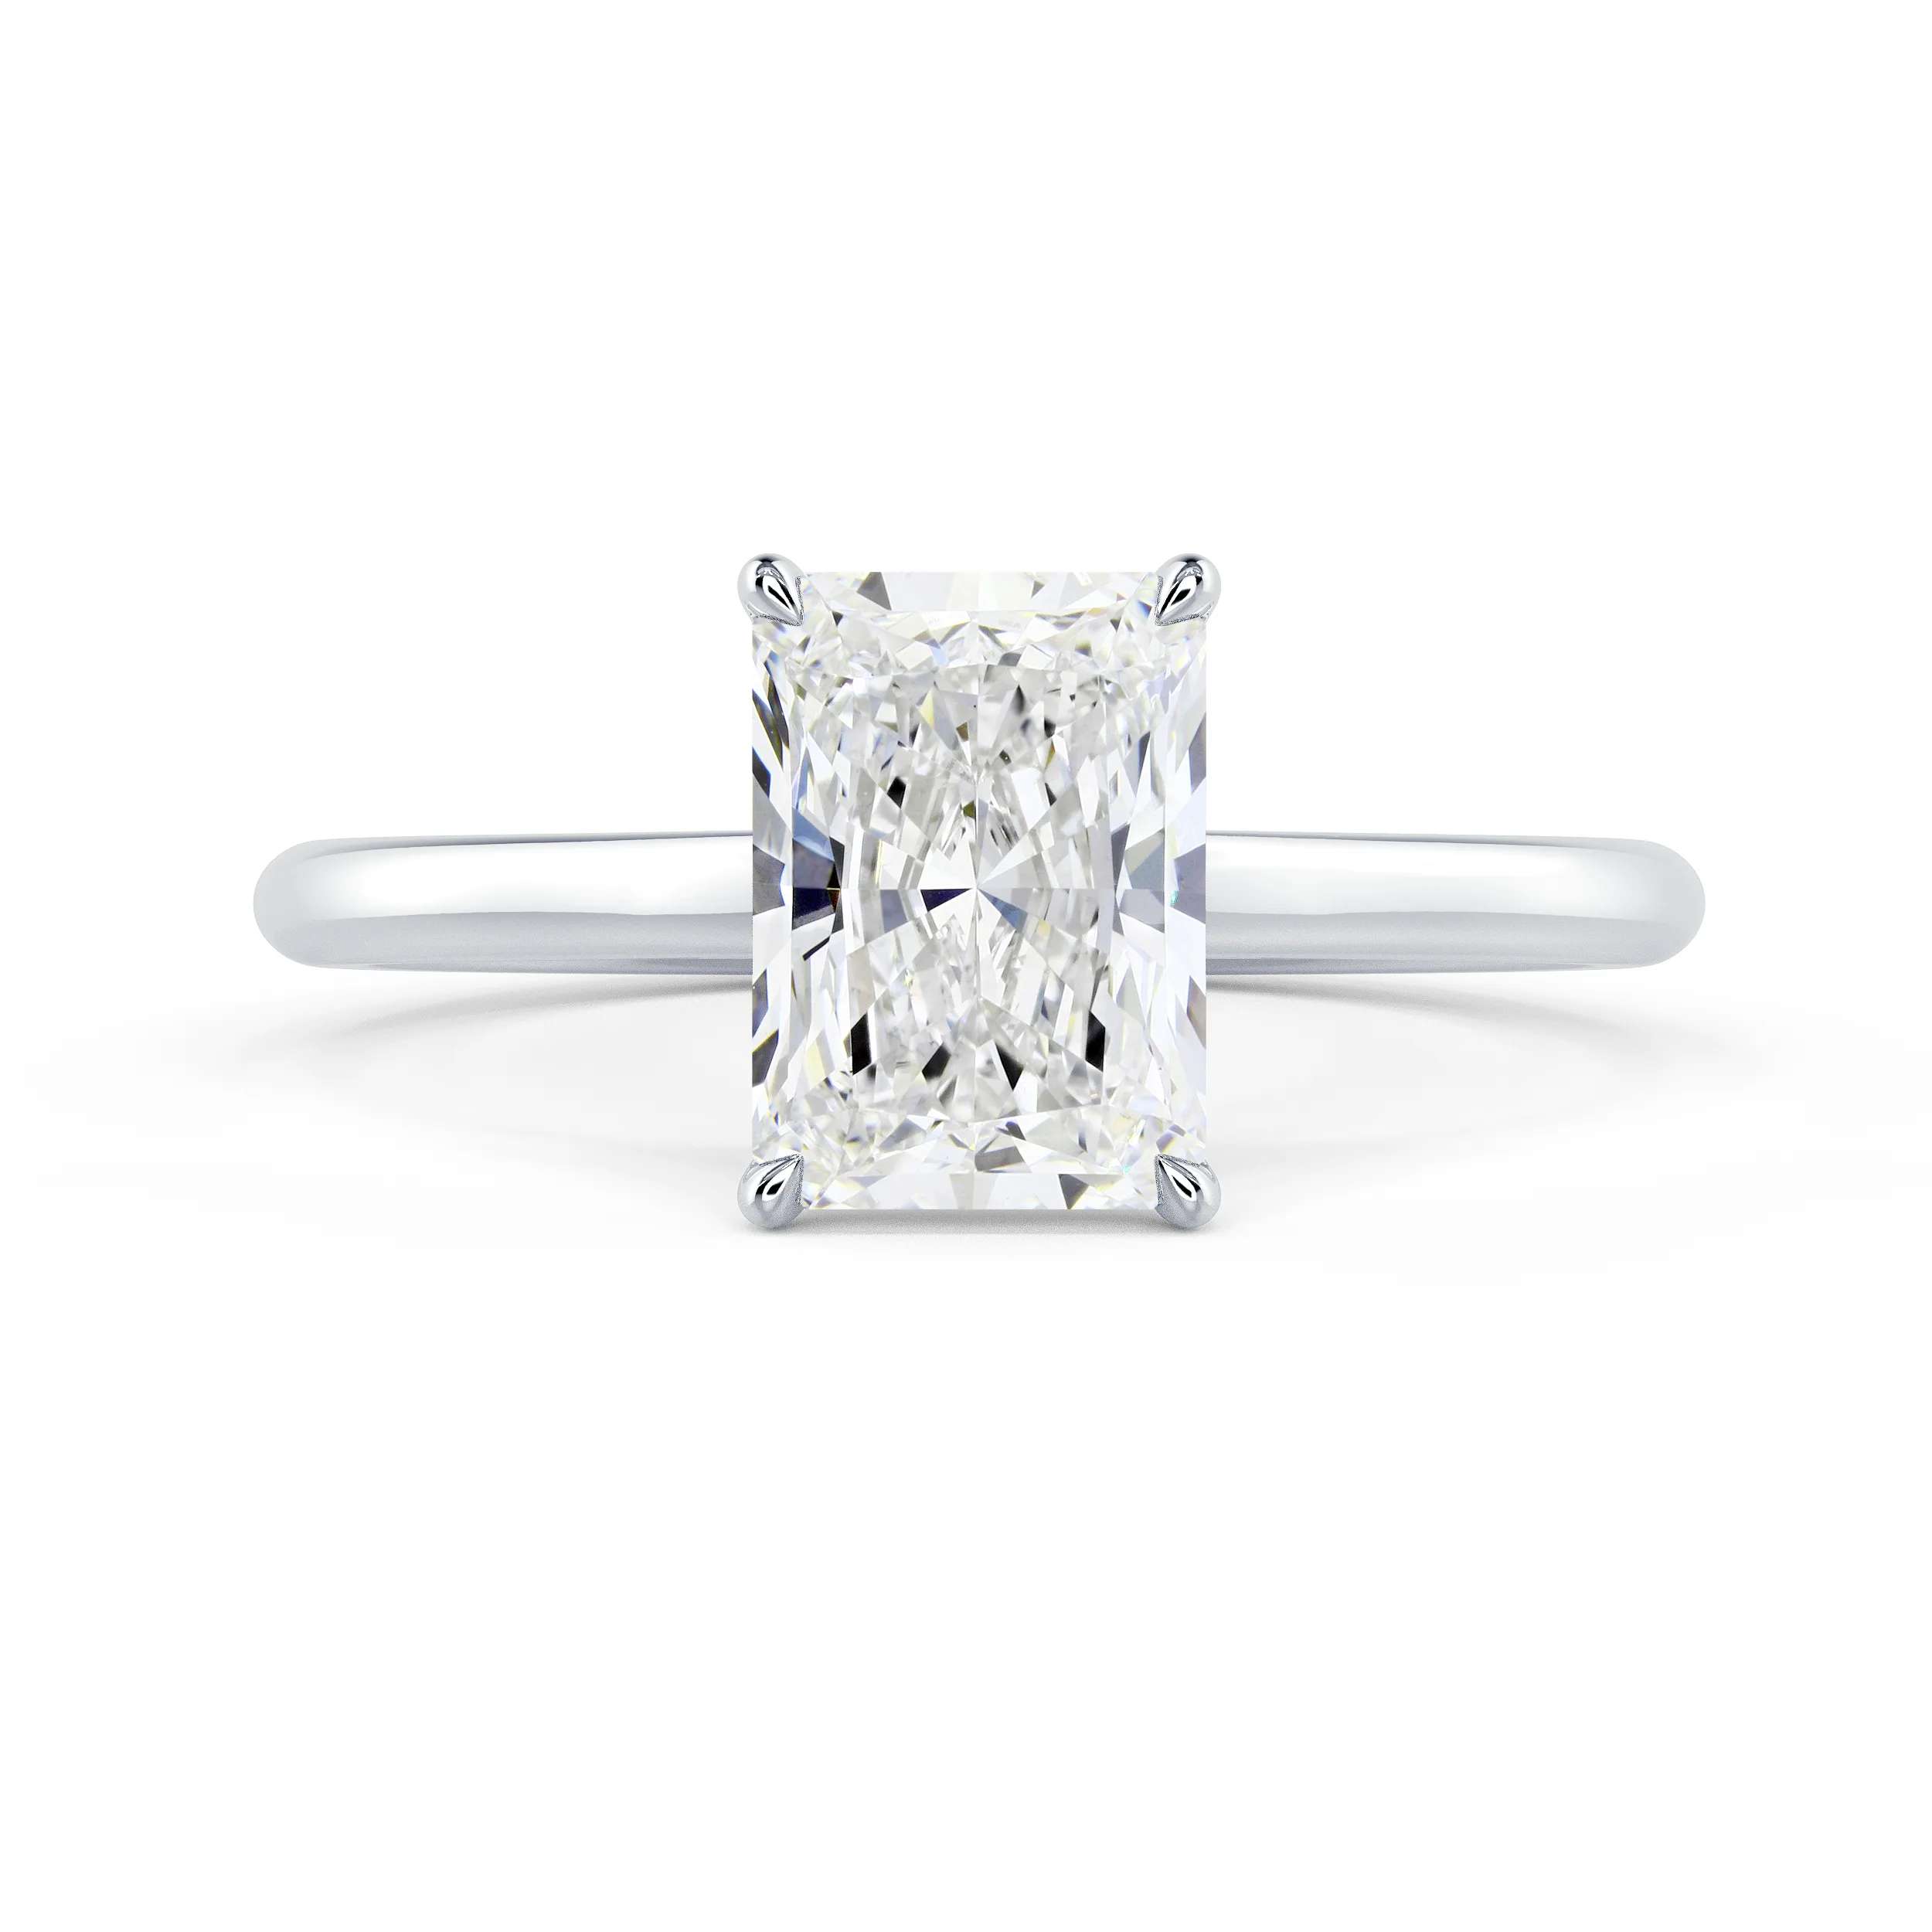 Exceptional Quality Lab Diamonds Radiant Cathedral Solitaire Diamond Engagement Ring in White Gold (Main View)